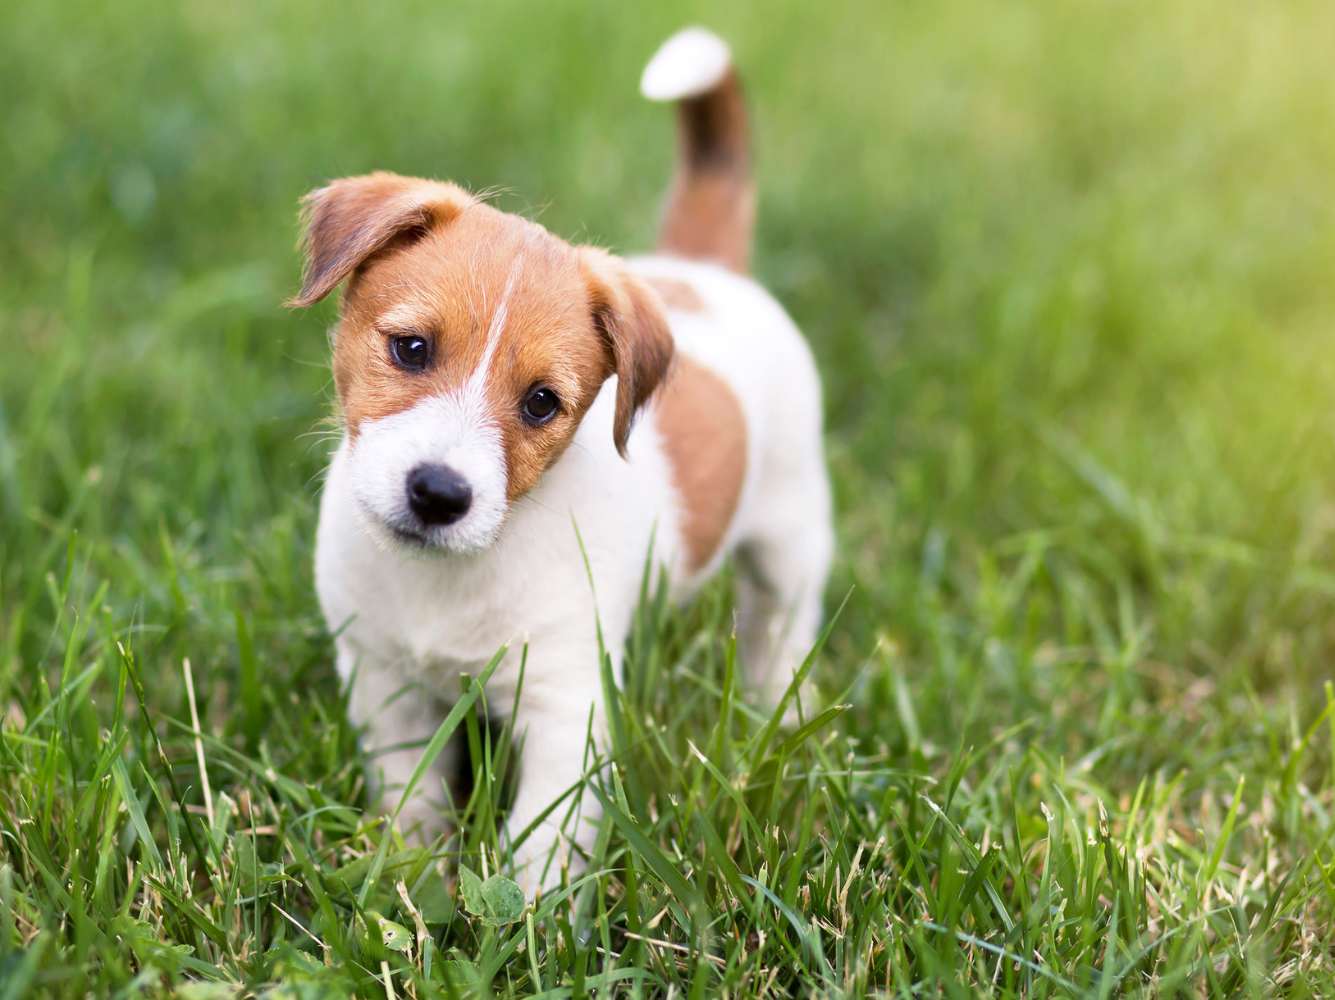 a cute dog standing in grass with tilted head